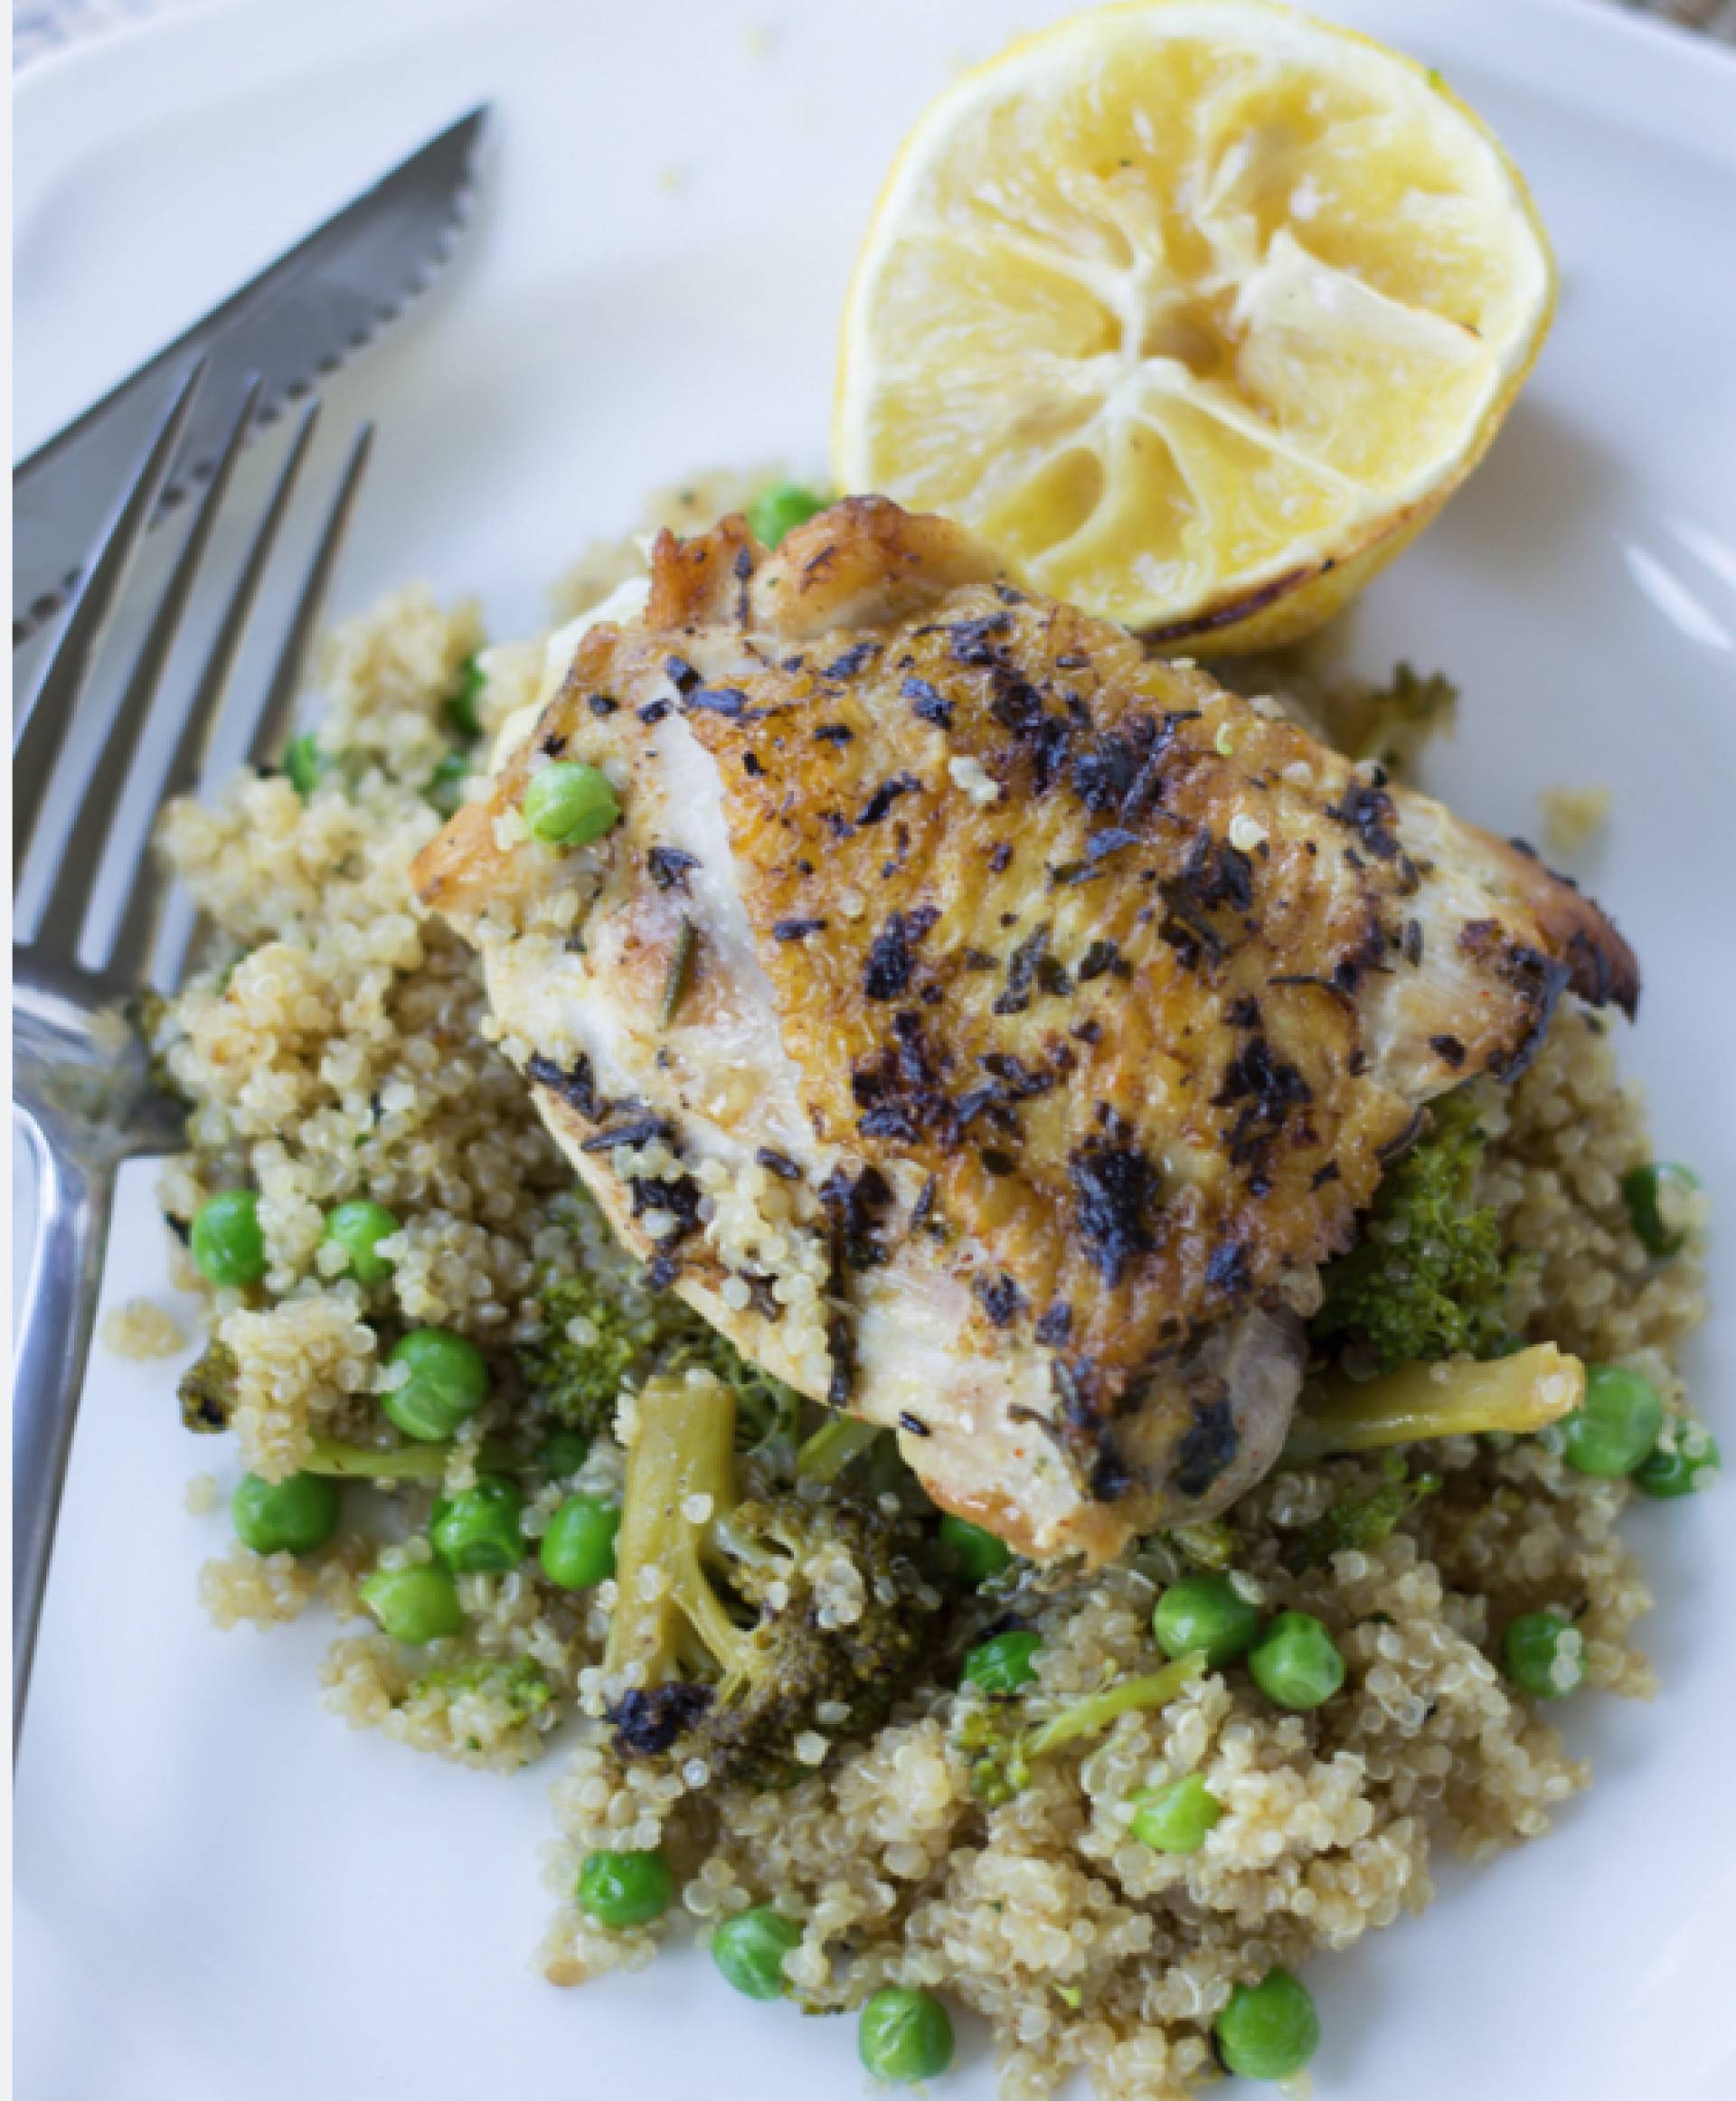 FITNESS: Lemon Herb Chicken Thigh (LOW CARB)